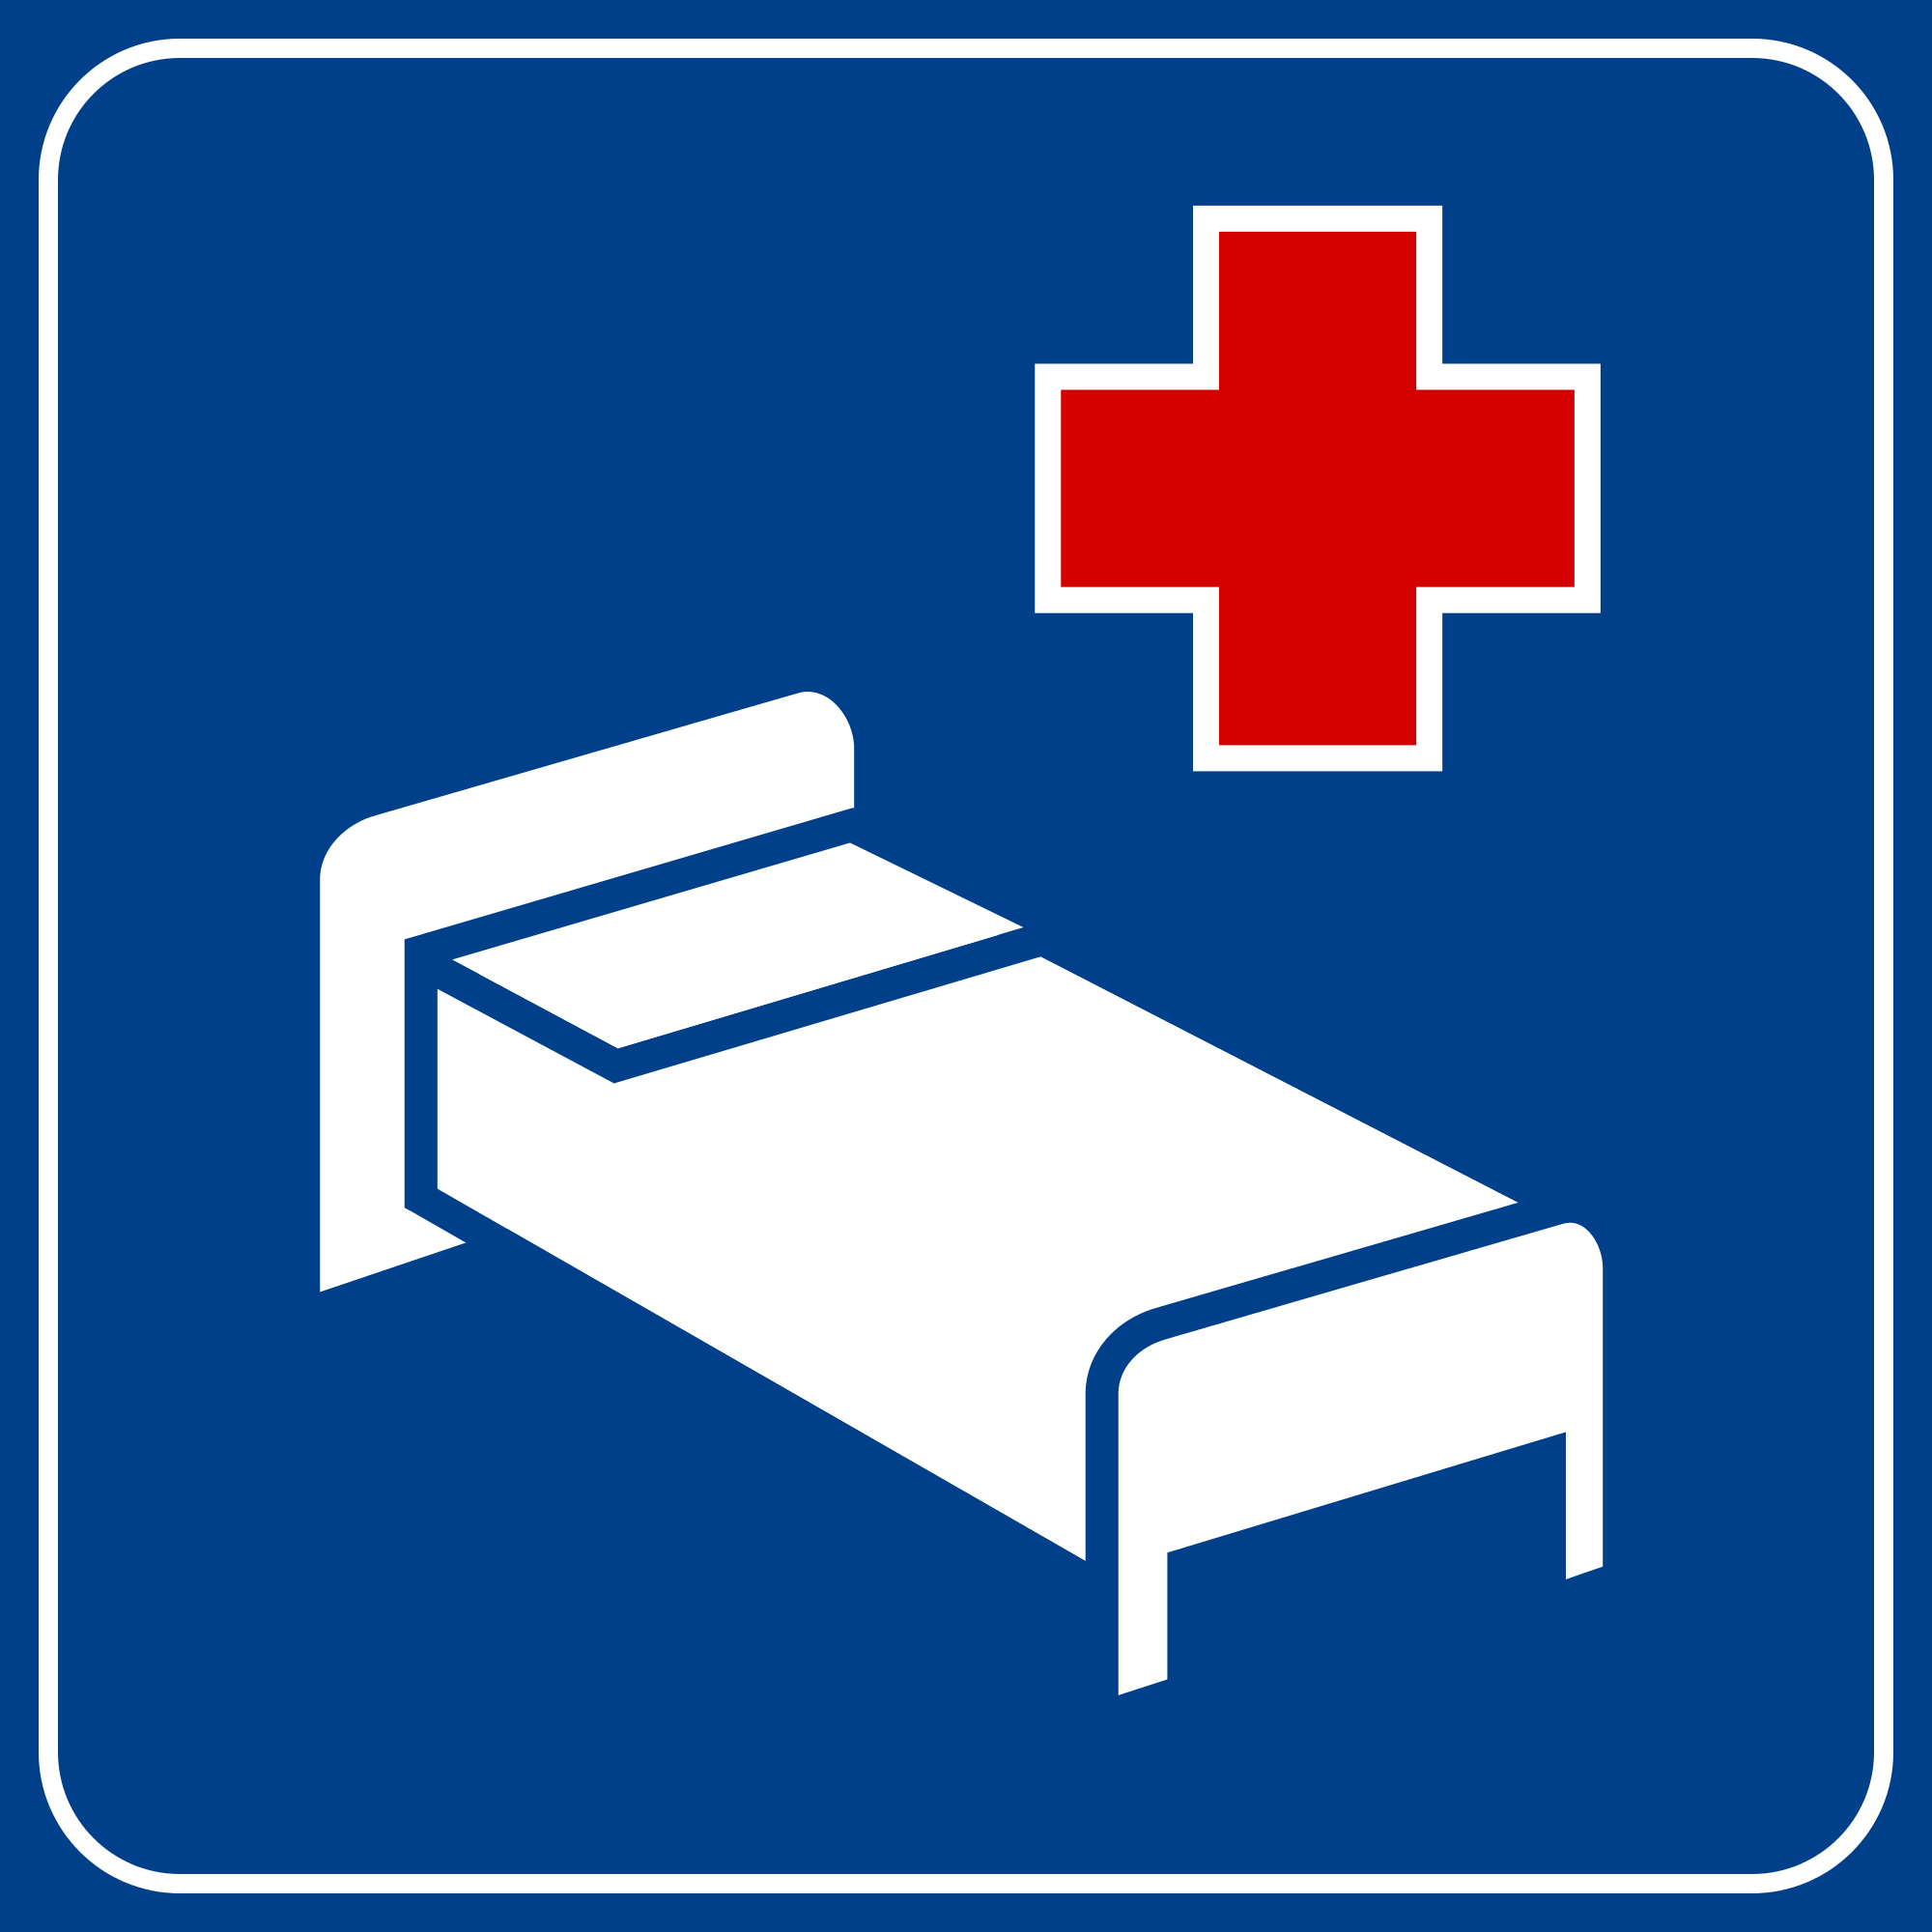 File:Italian traffic signs - ospedale.svg